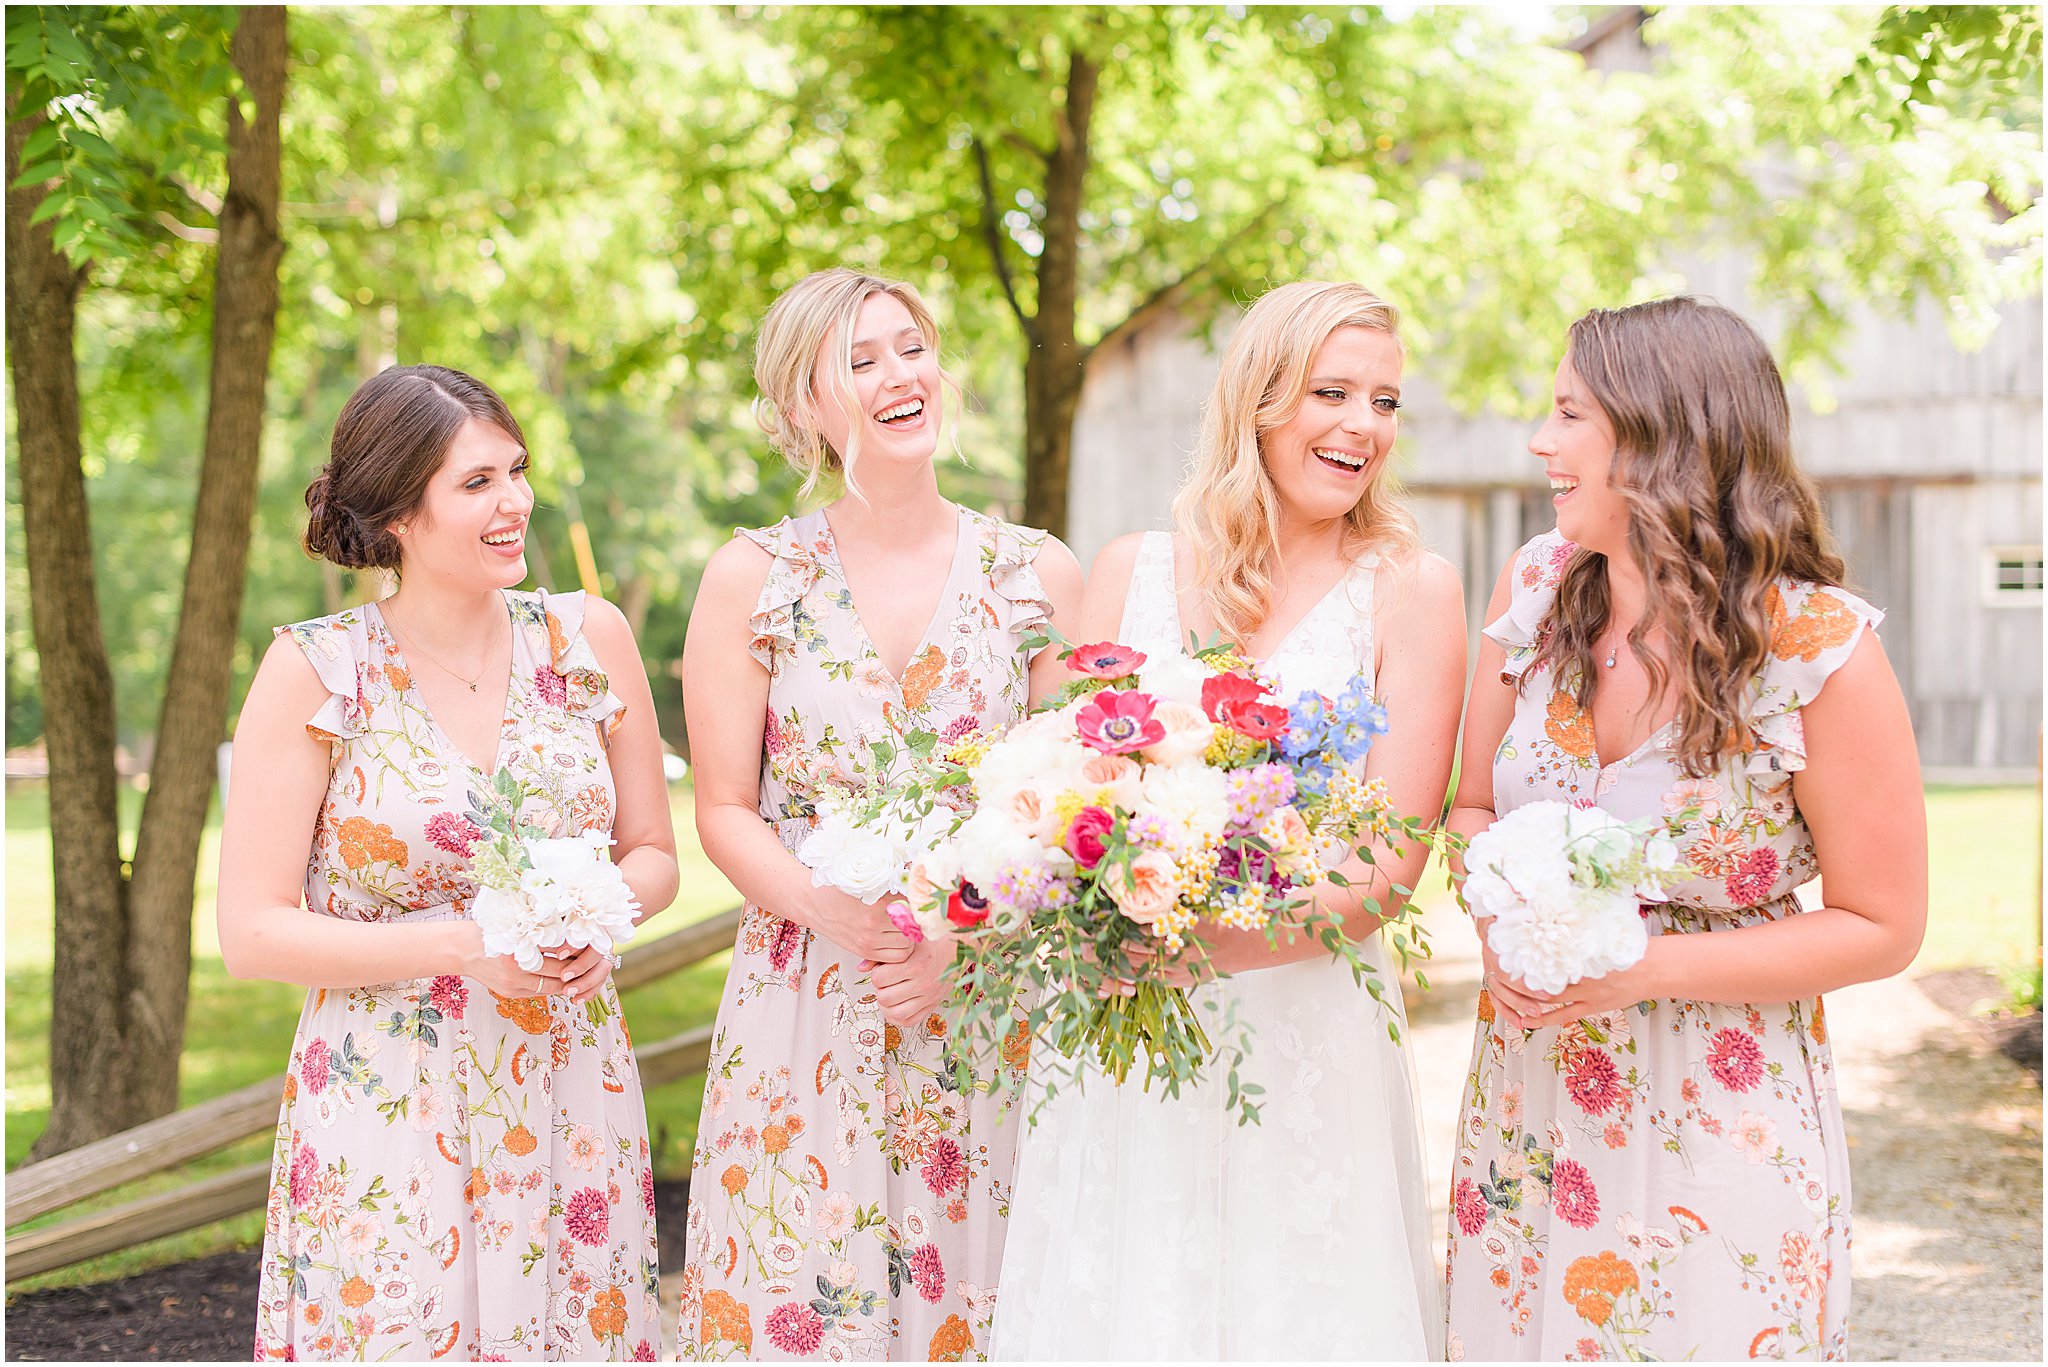 Bride and bridesmaids laughing together The Old Barn At Brown County wedding